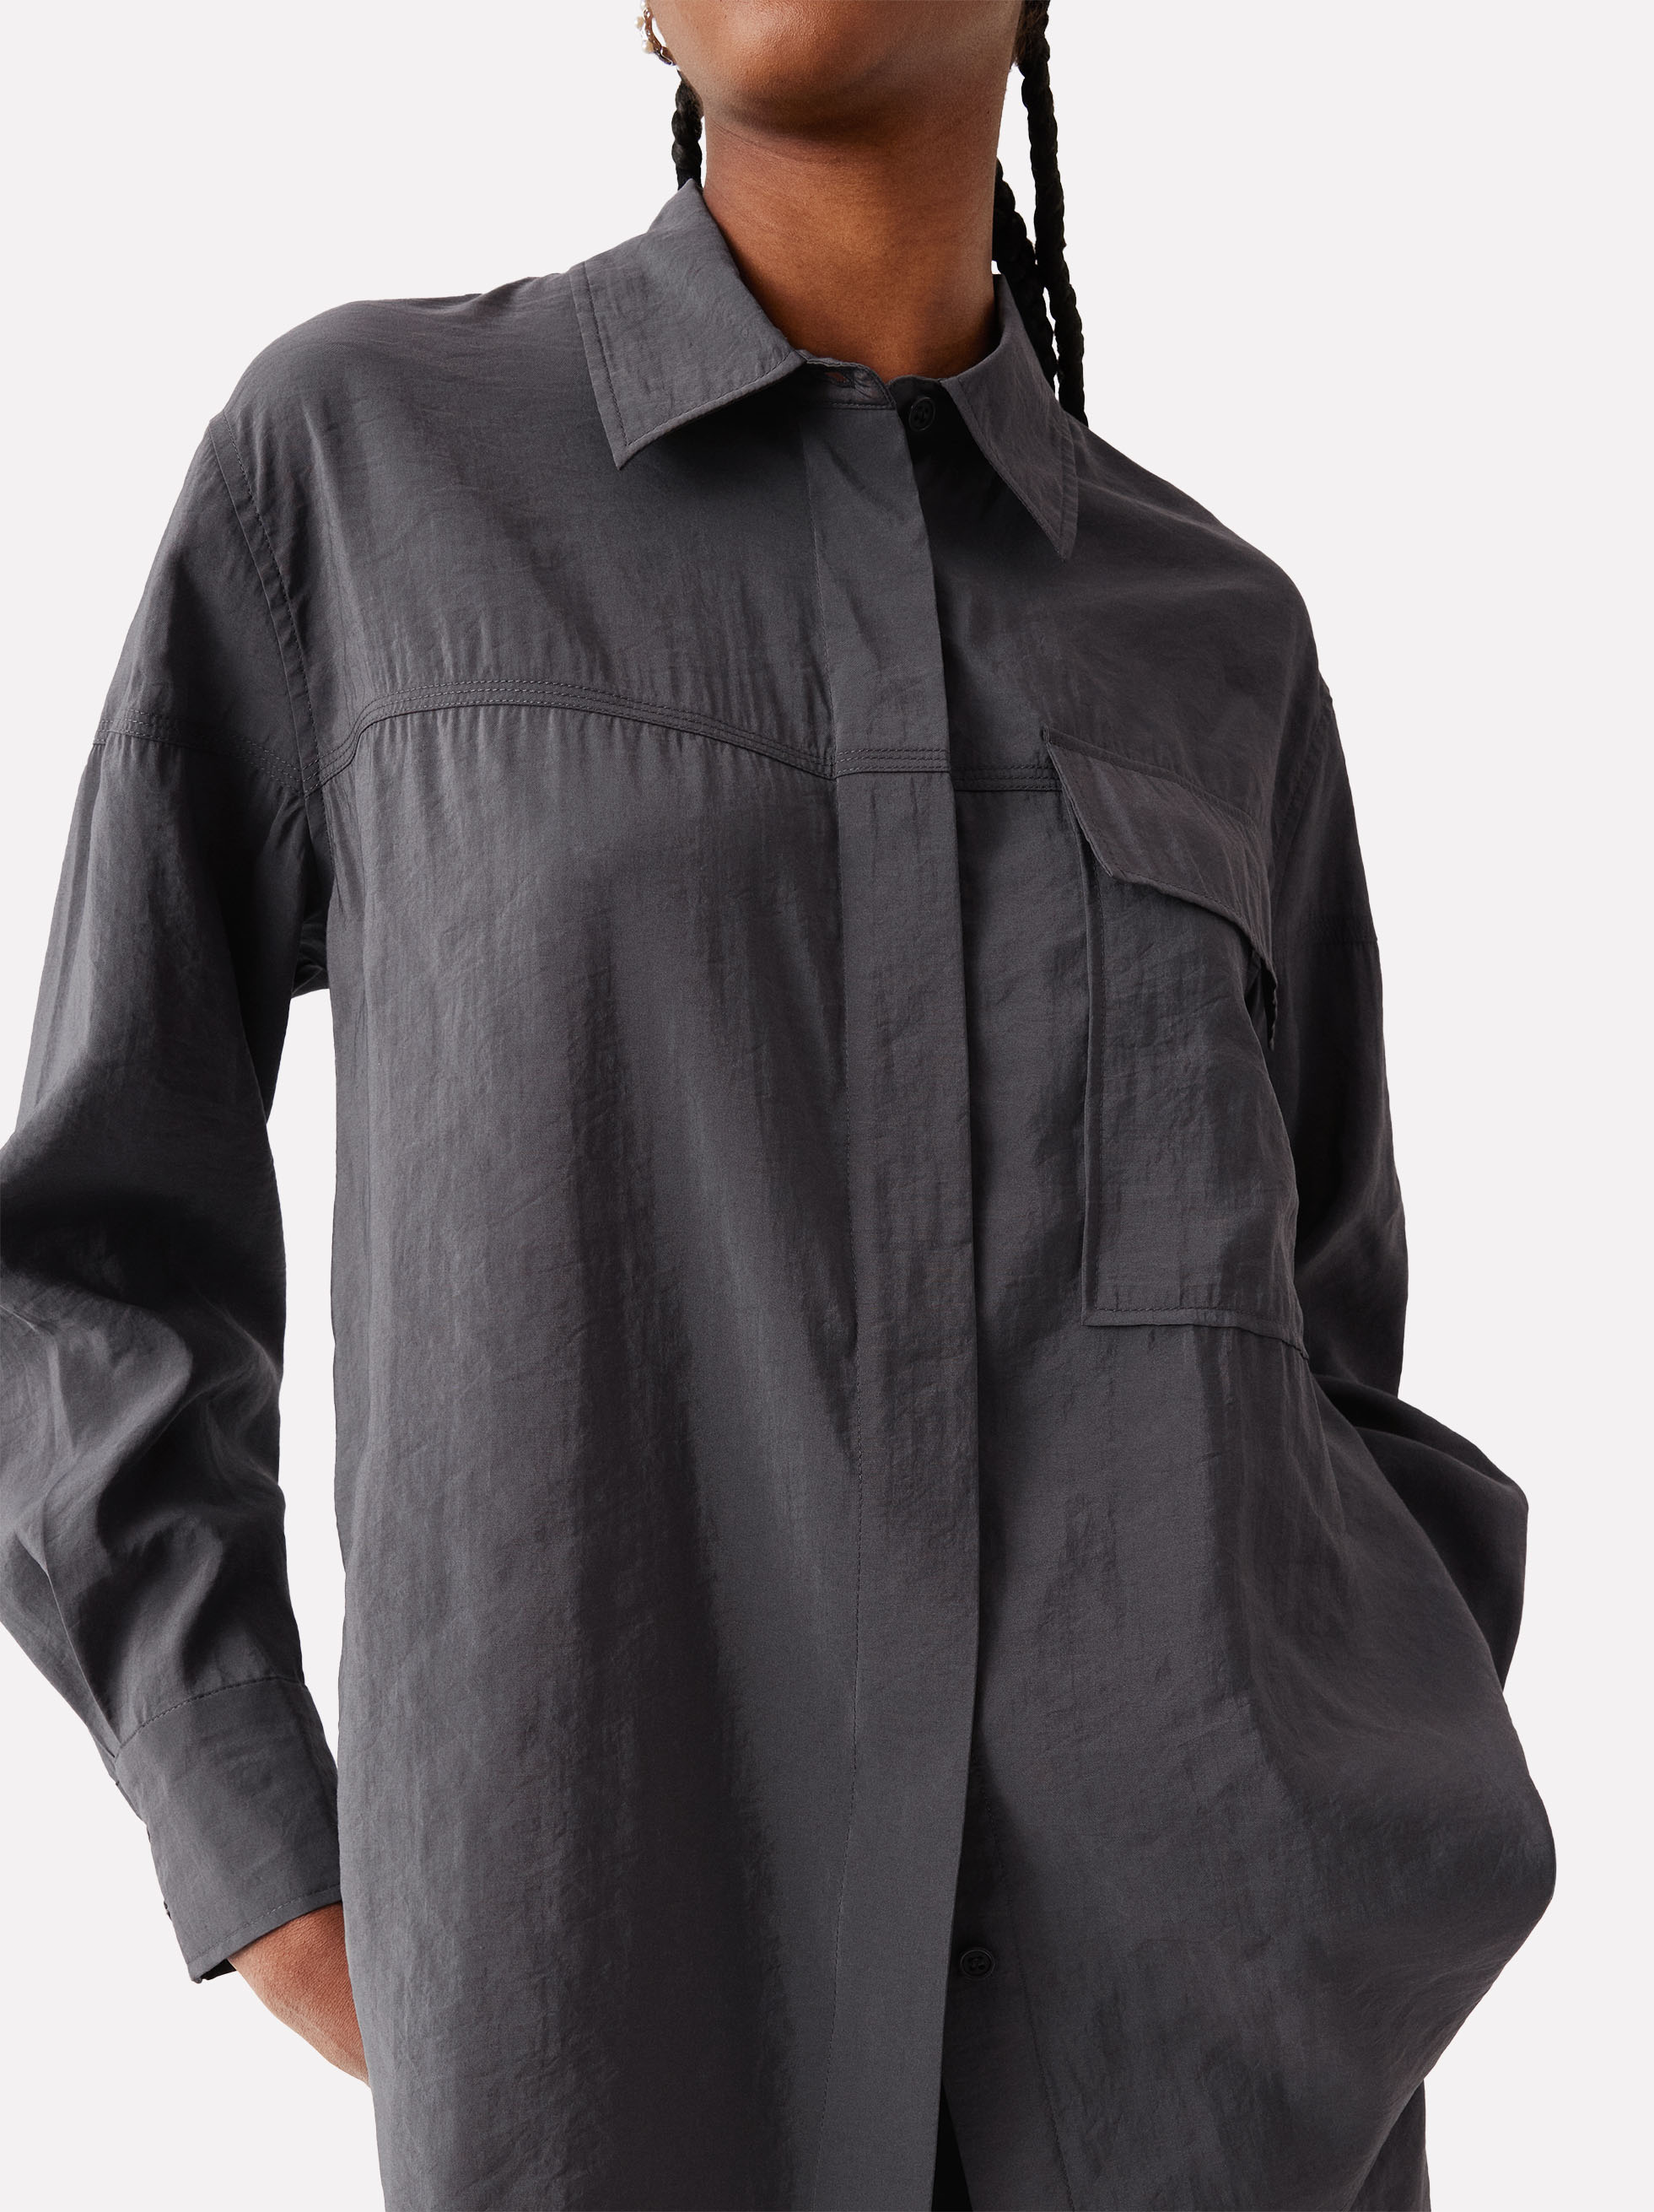 Online Exclusive - Long-Sleeve Shirt With Buttons image number 3.0